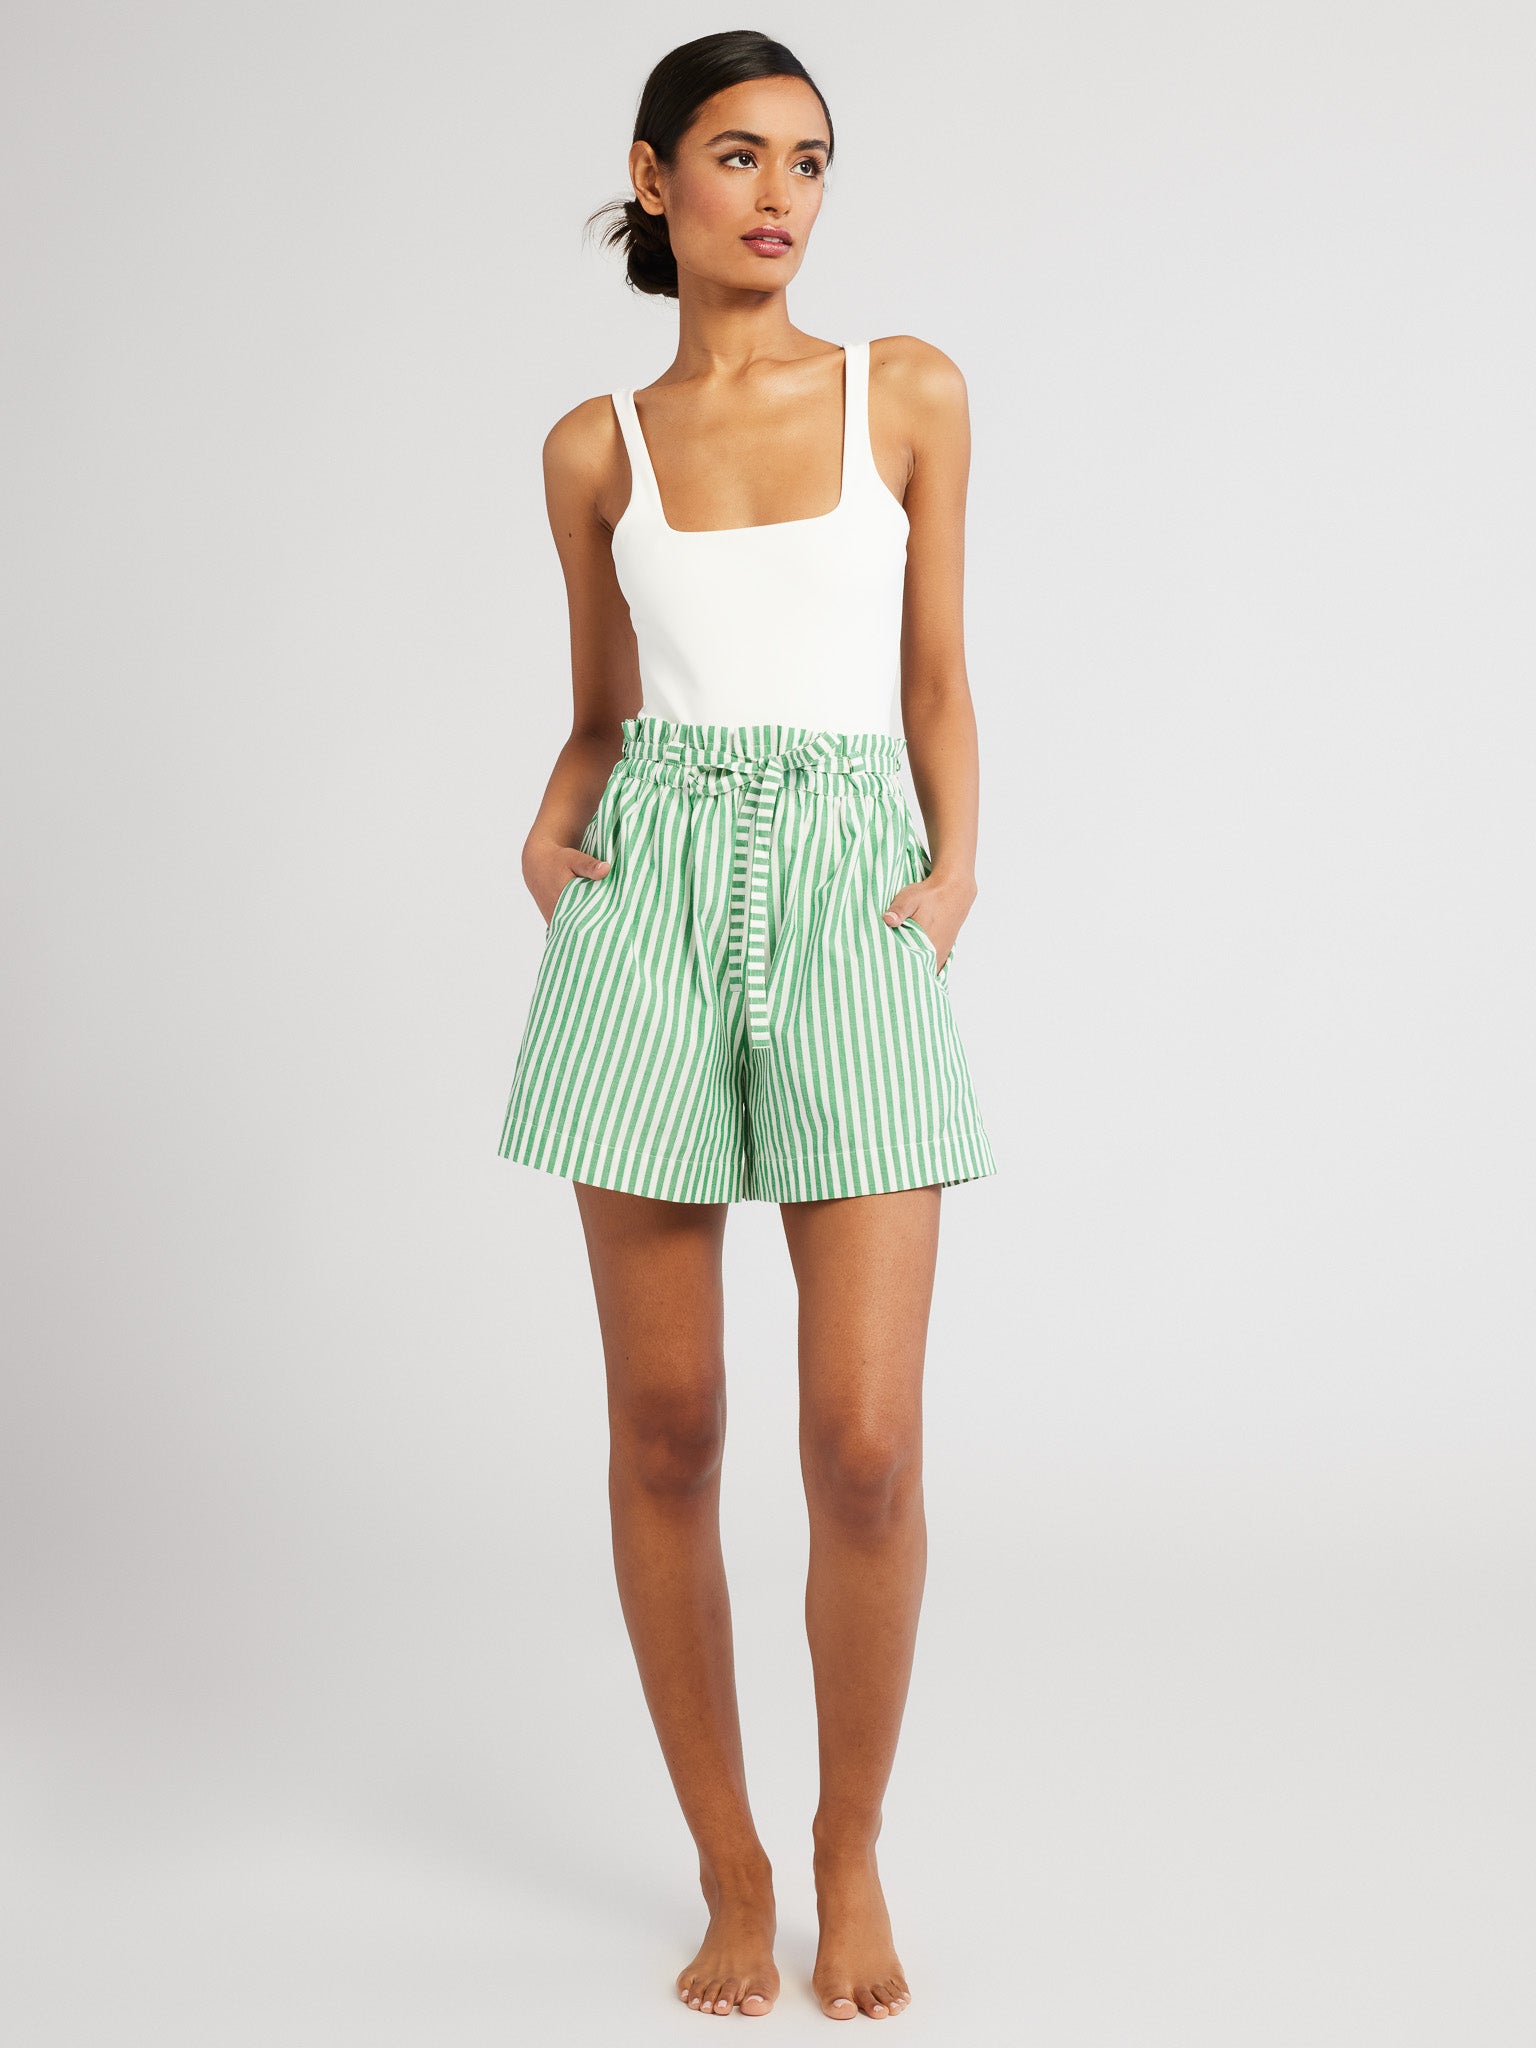 MILLE Clothing Cary Short in Kelly Stripe